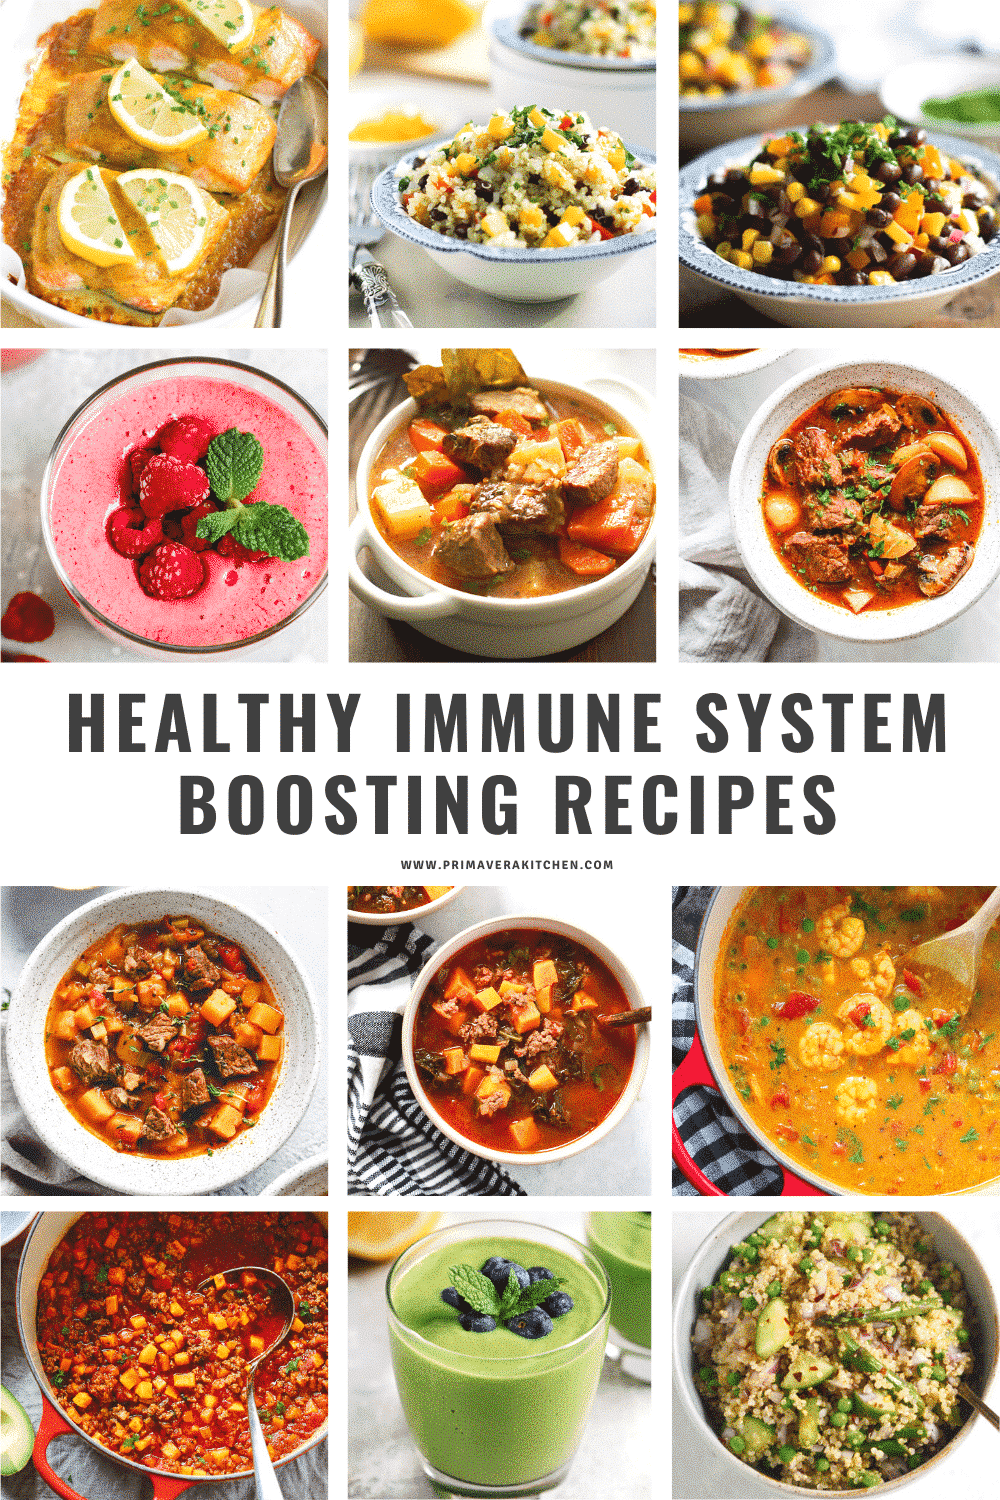 titled photo collage (and shown): Healthy Immune System Boosting Recipes